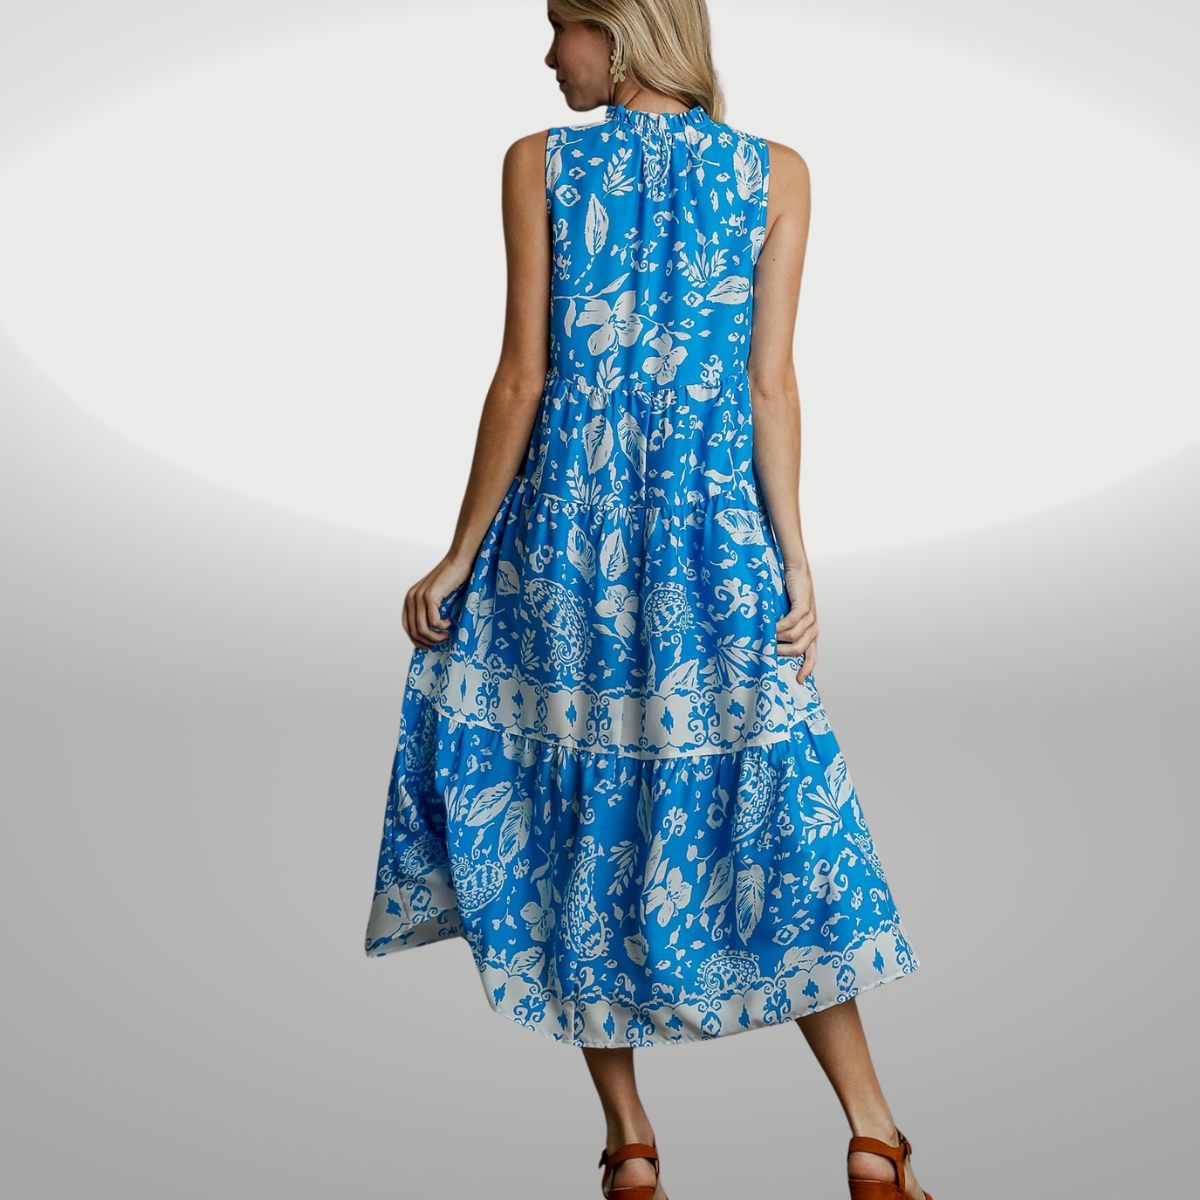 The back view of a woman wearing a blue Floral Sleeveless Midi Dress by FASHION GO.